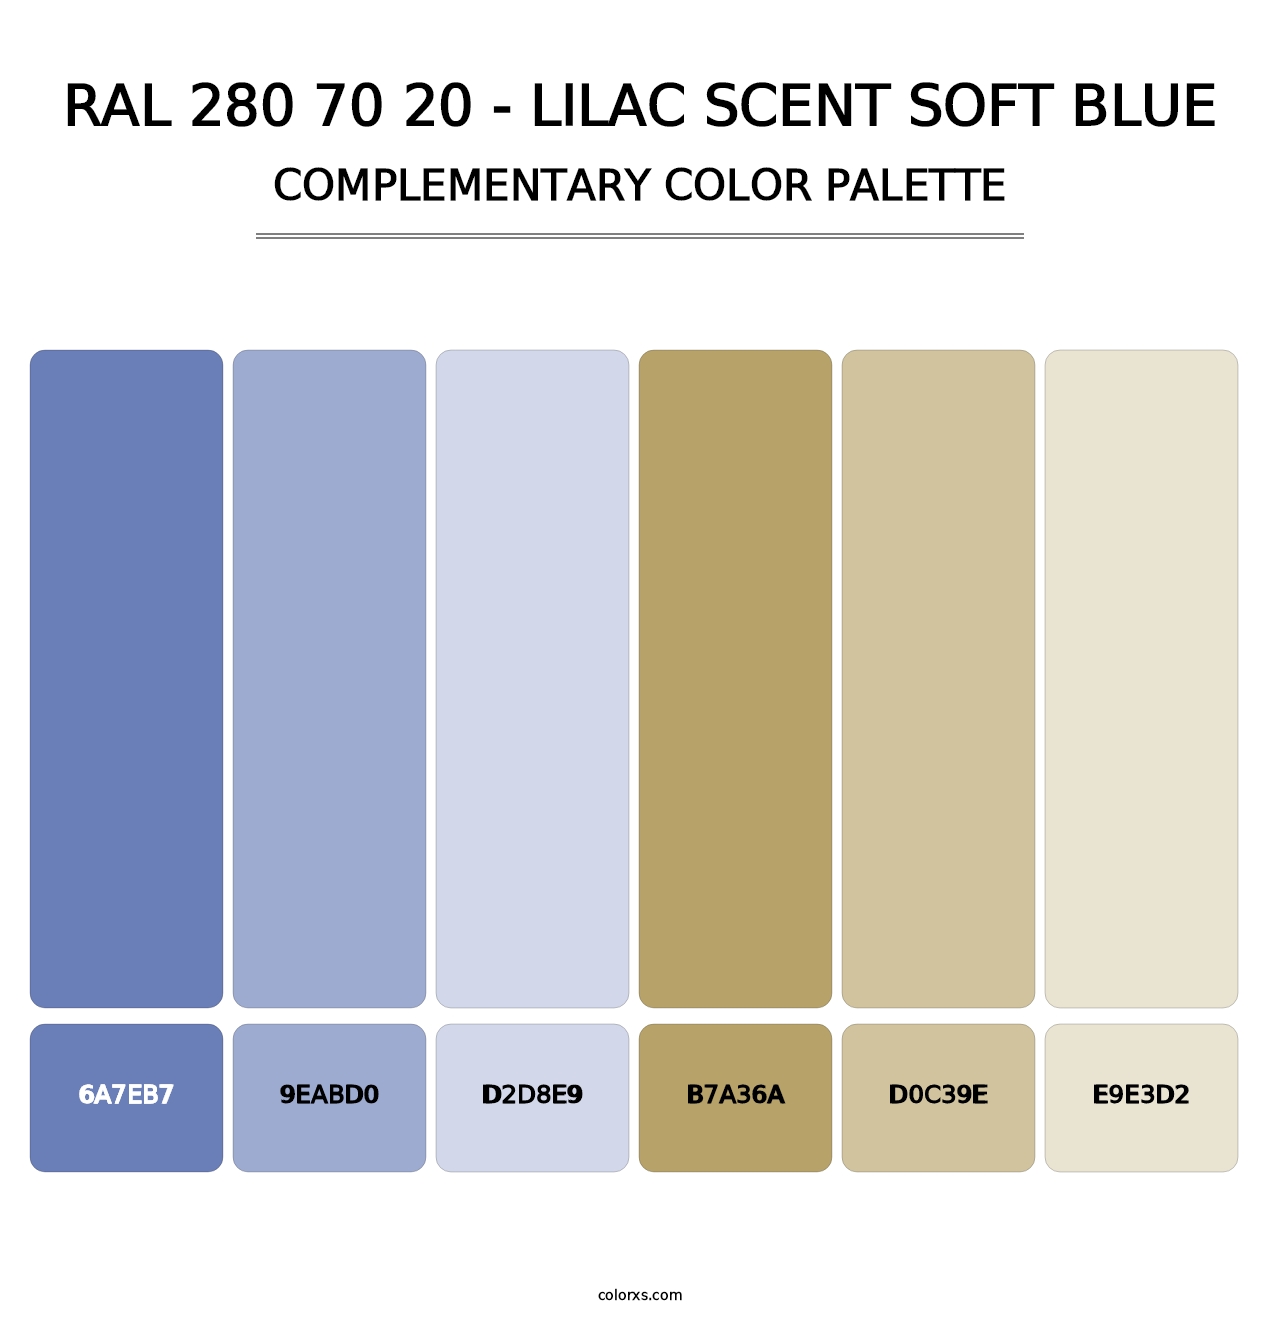 RAL 280 70 20 - Lilac Scent Soft Blue - Complementary Color Palette